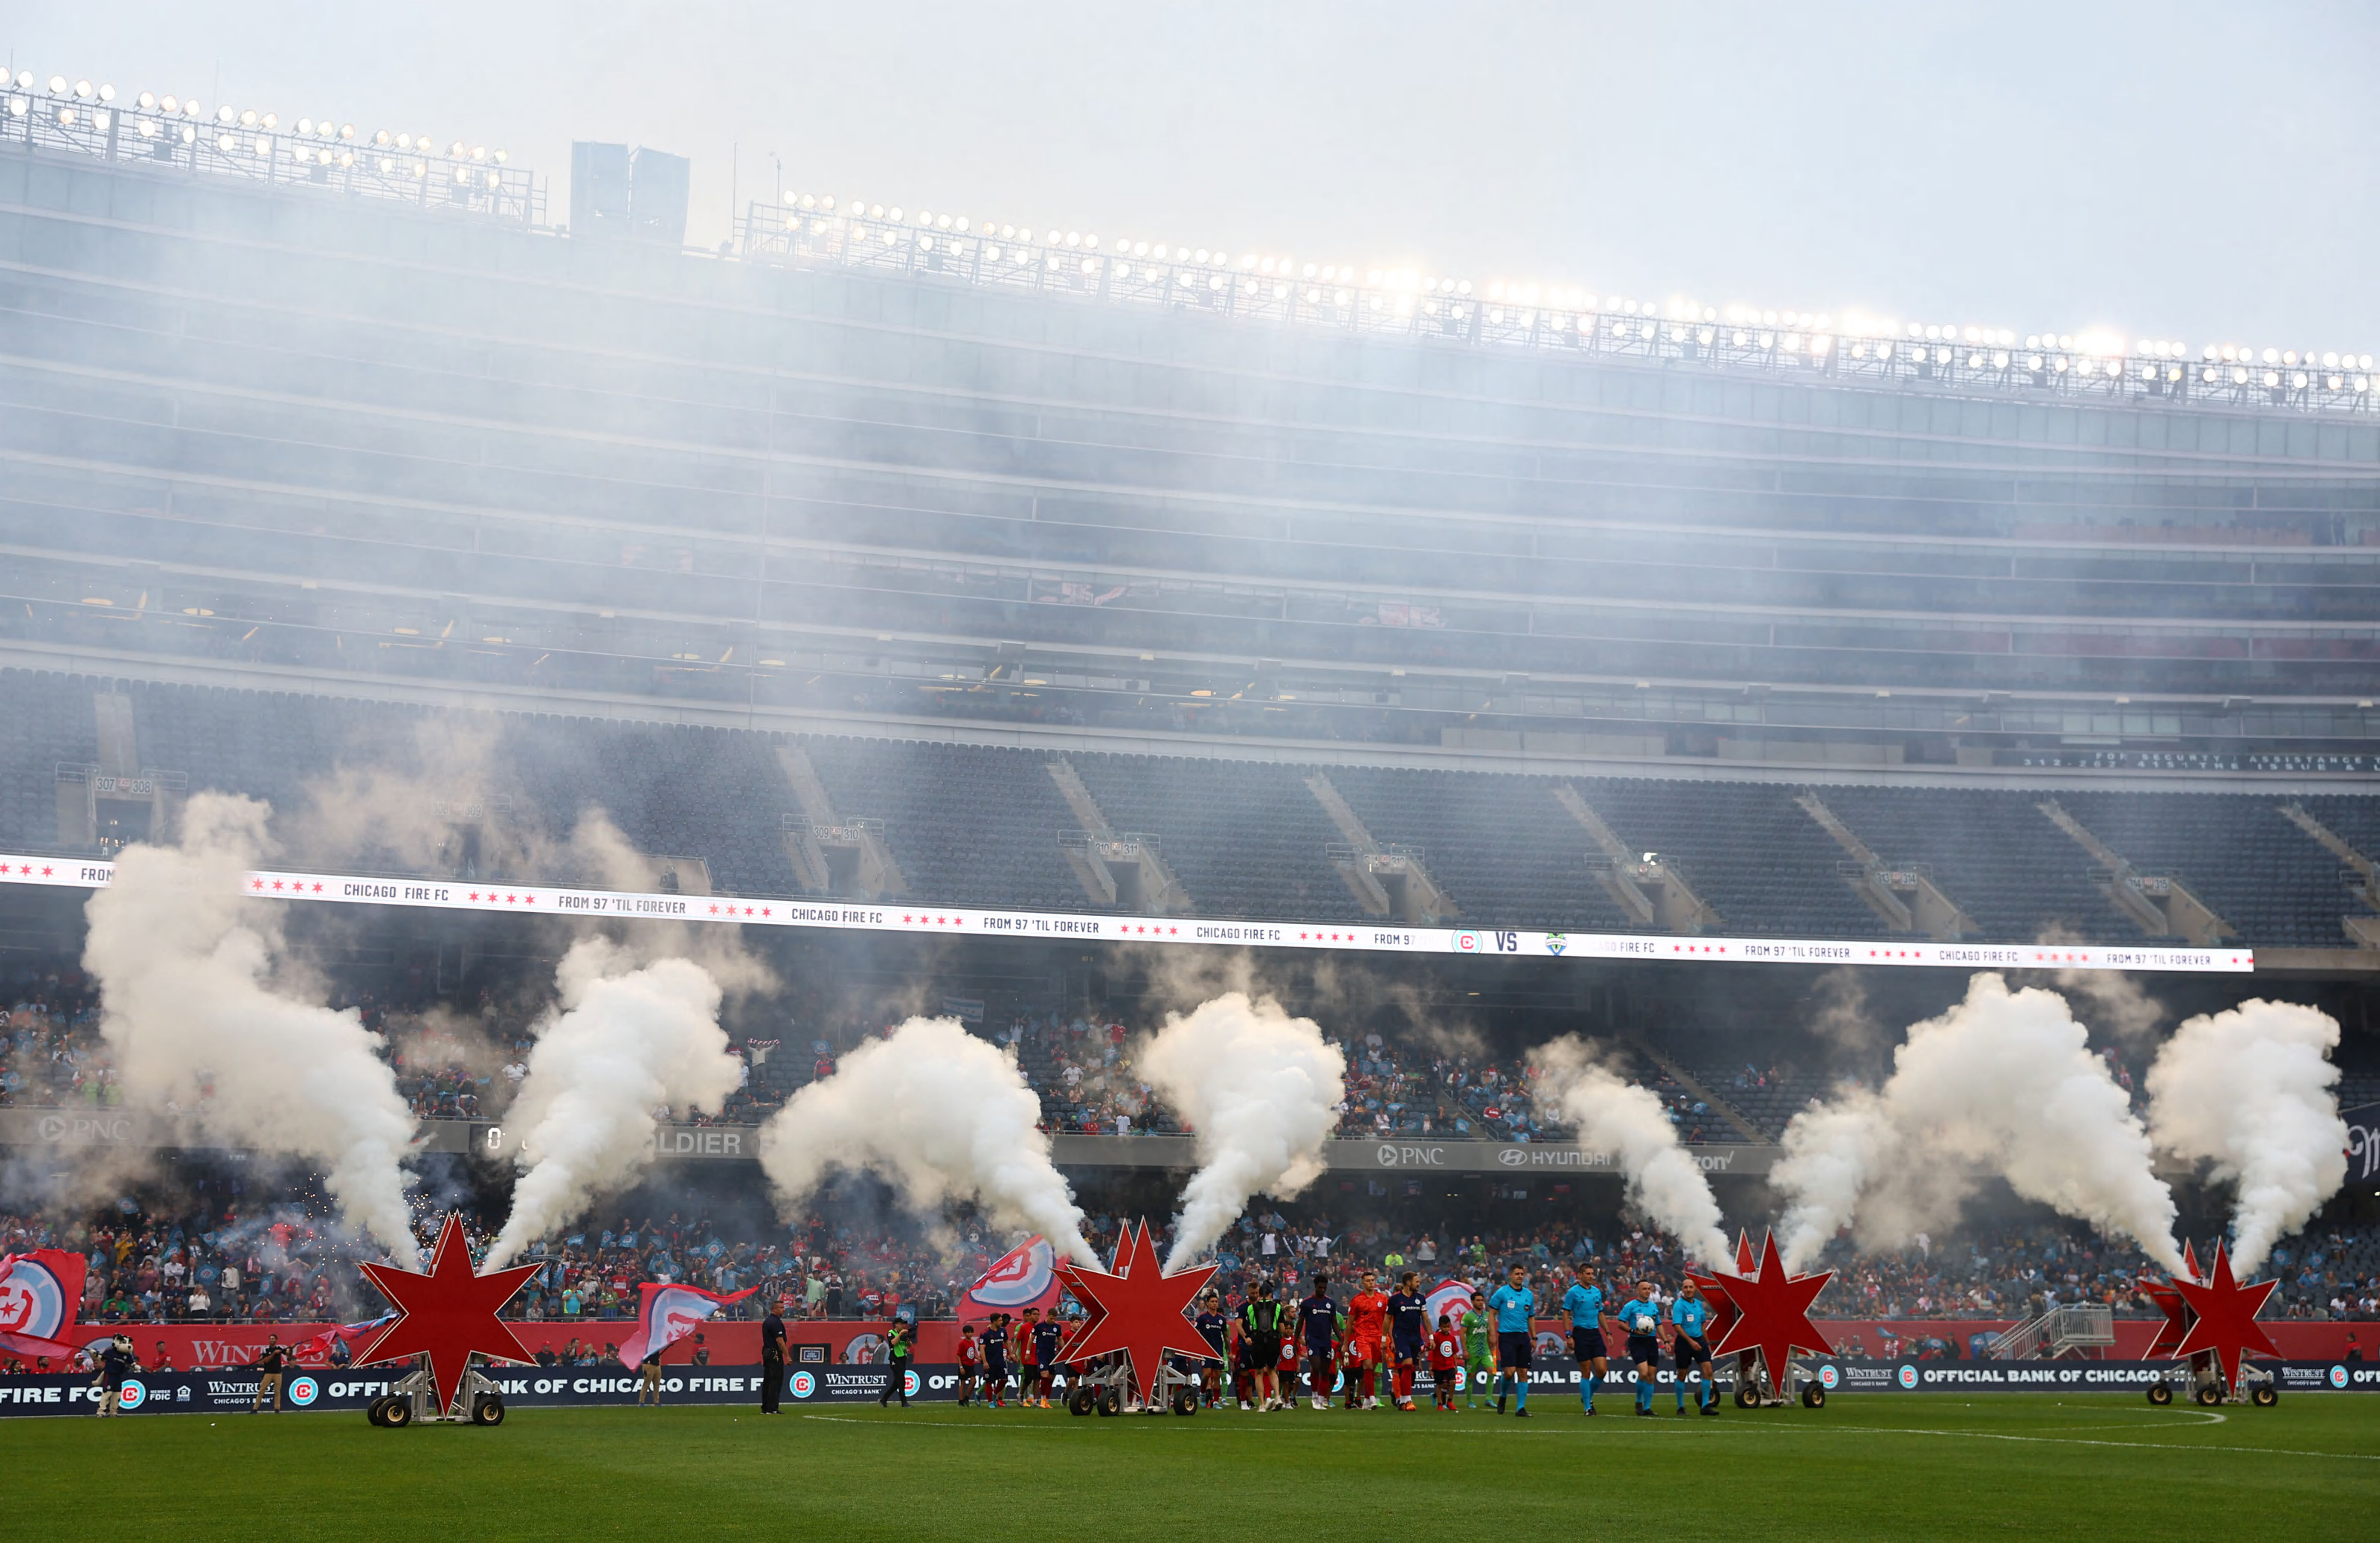 With move to Soldier Field official, Chicago Fire set sights on